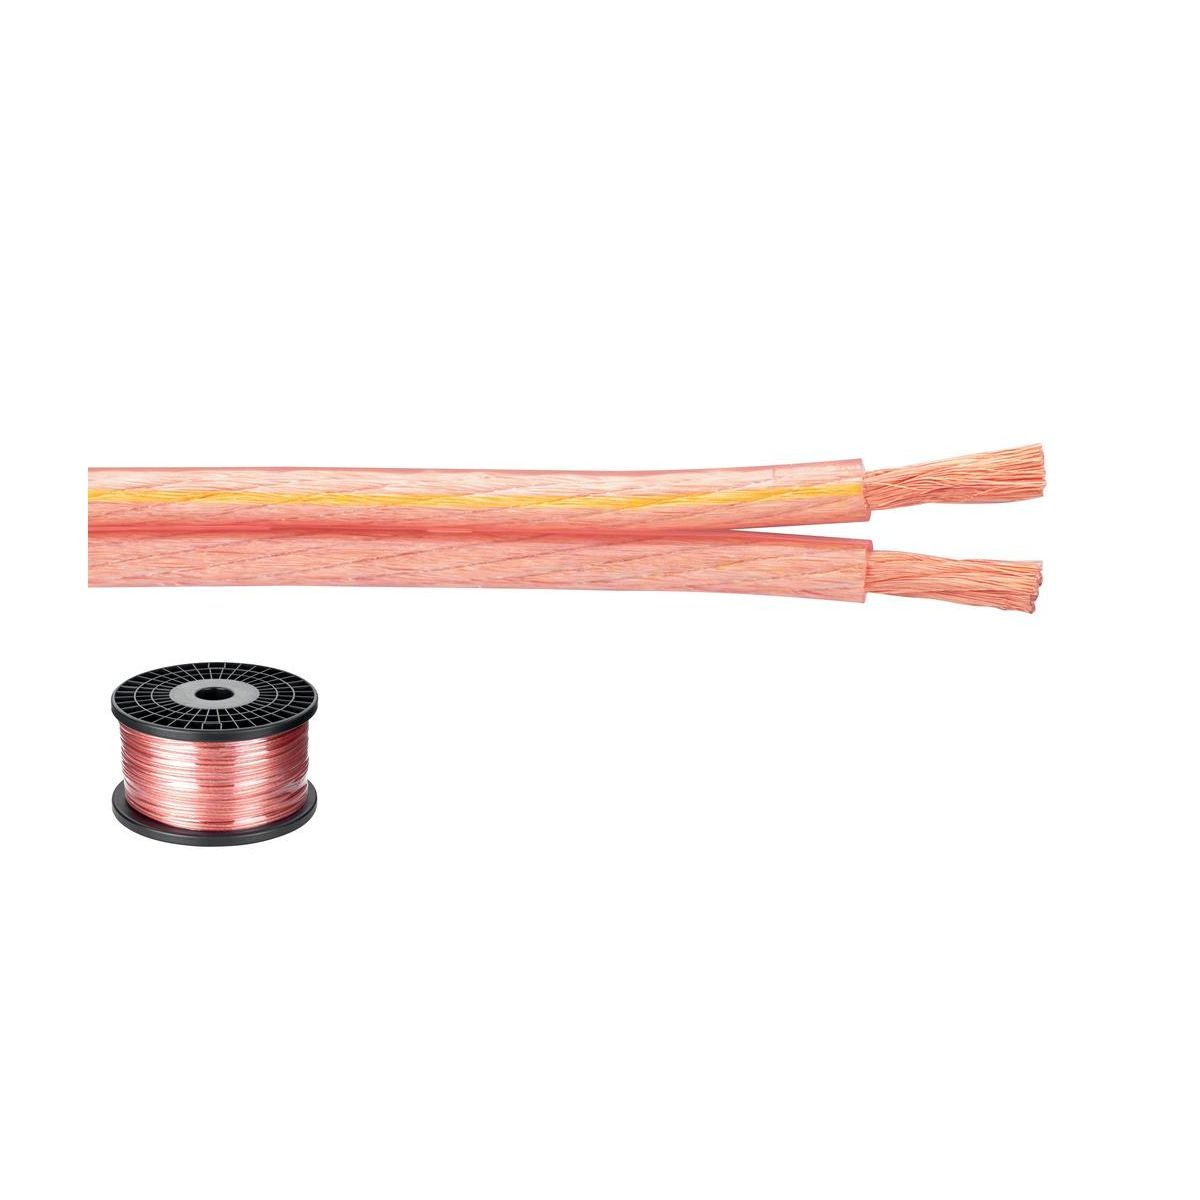 SPC-140 | Speaker cable “HIGH QUALITY”, 2 x 4 mm2, 100 m-0